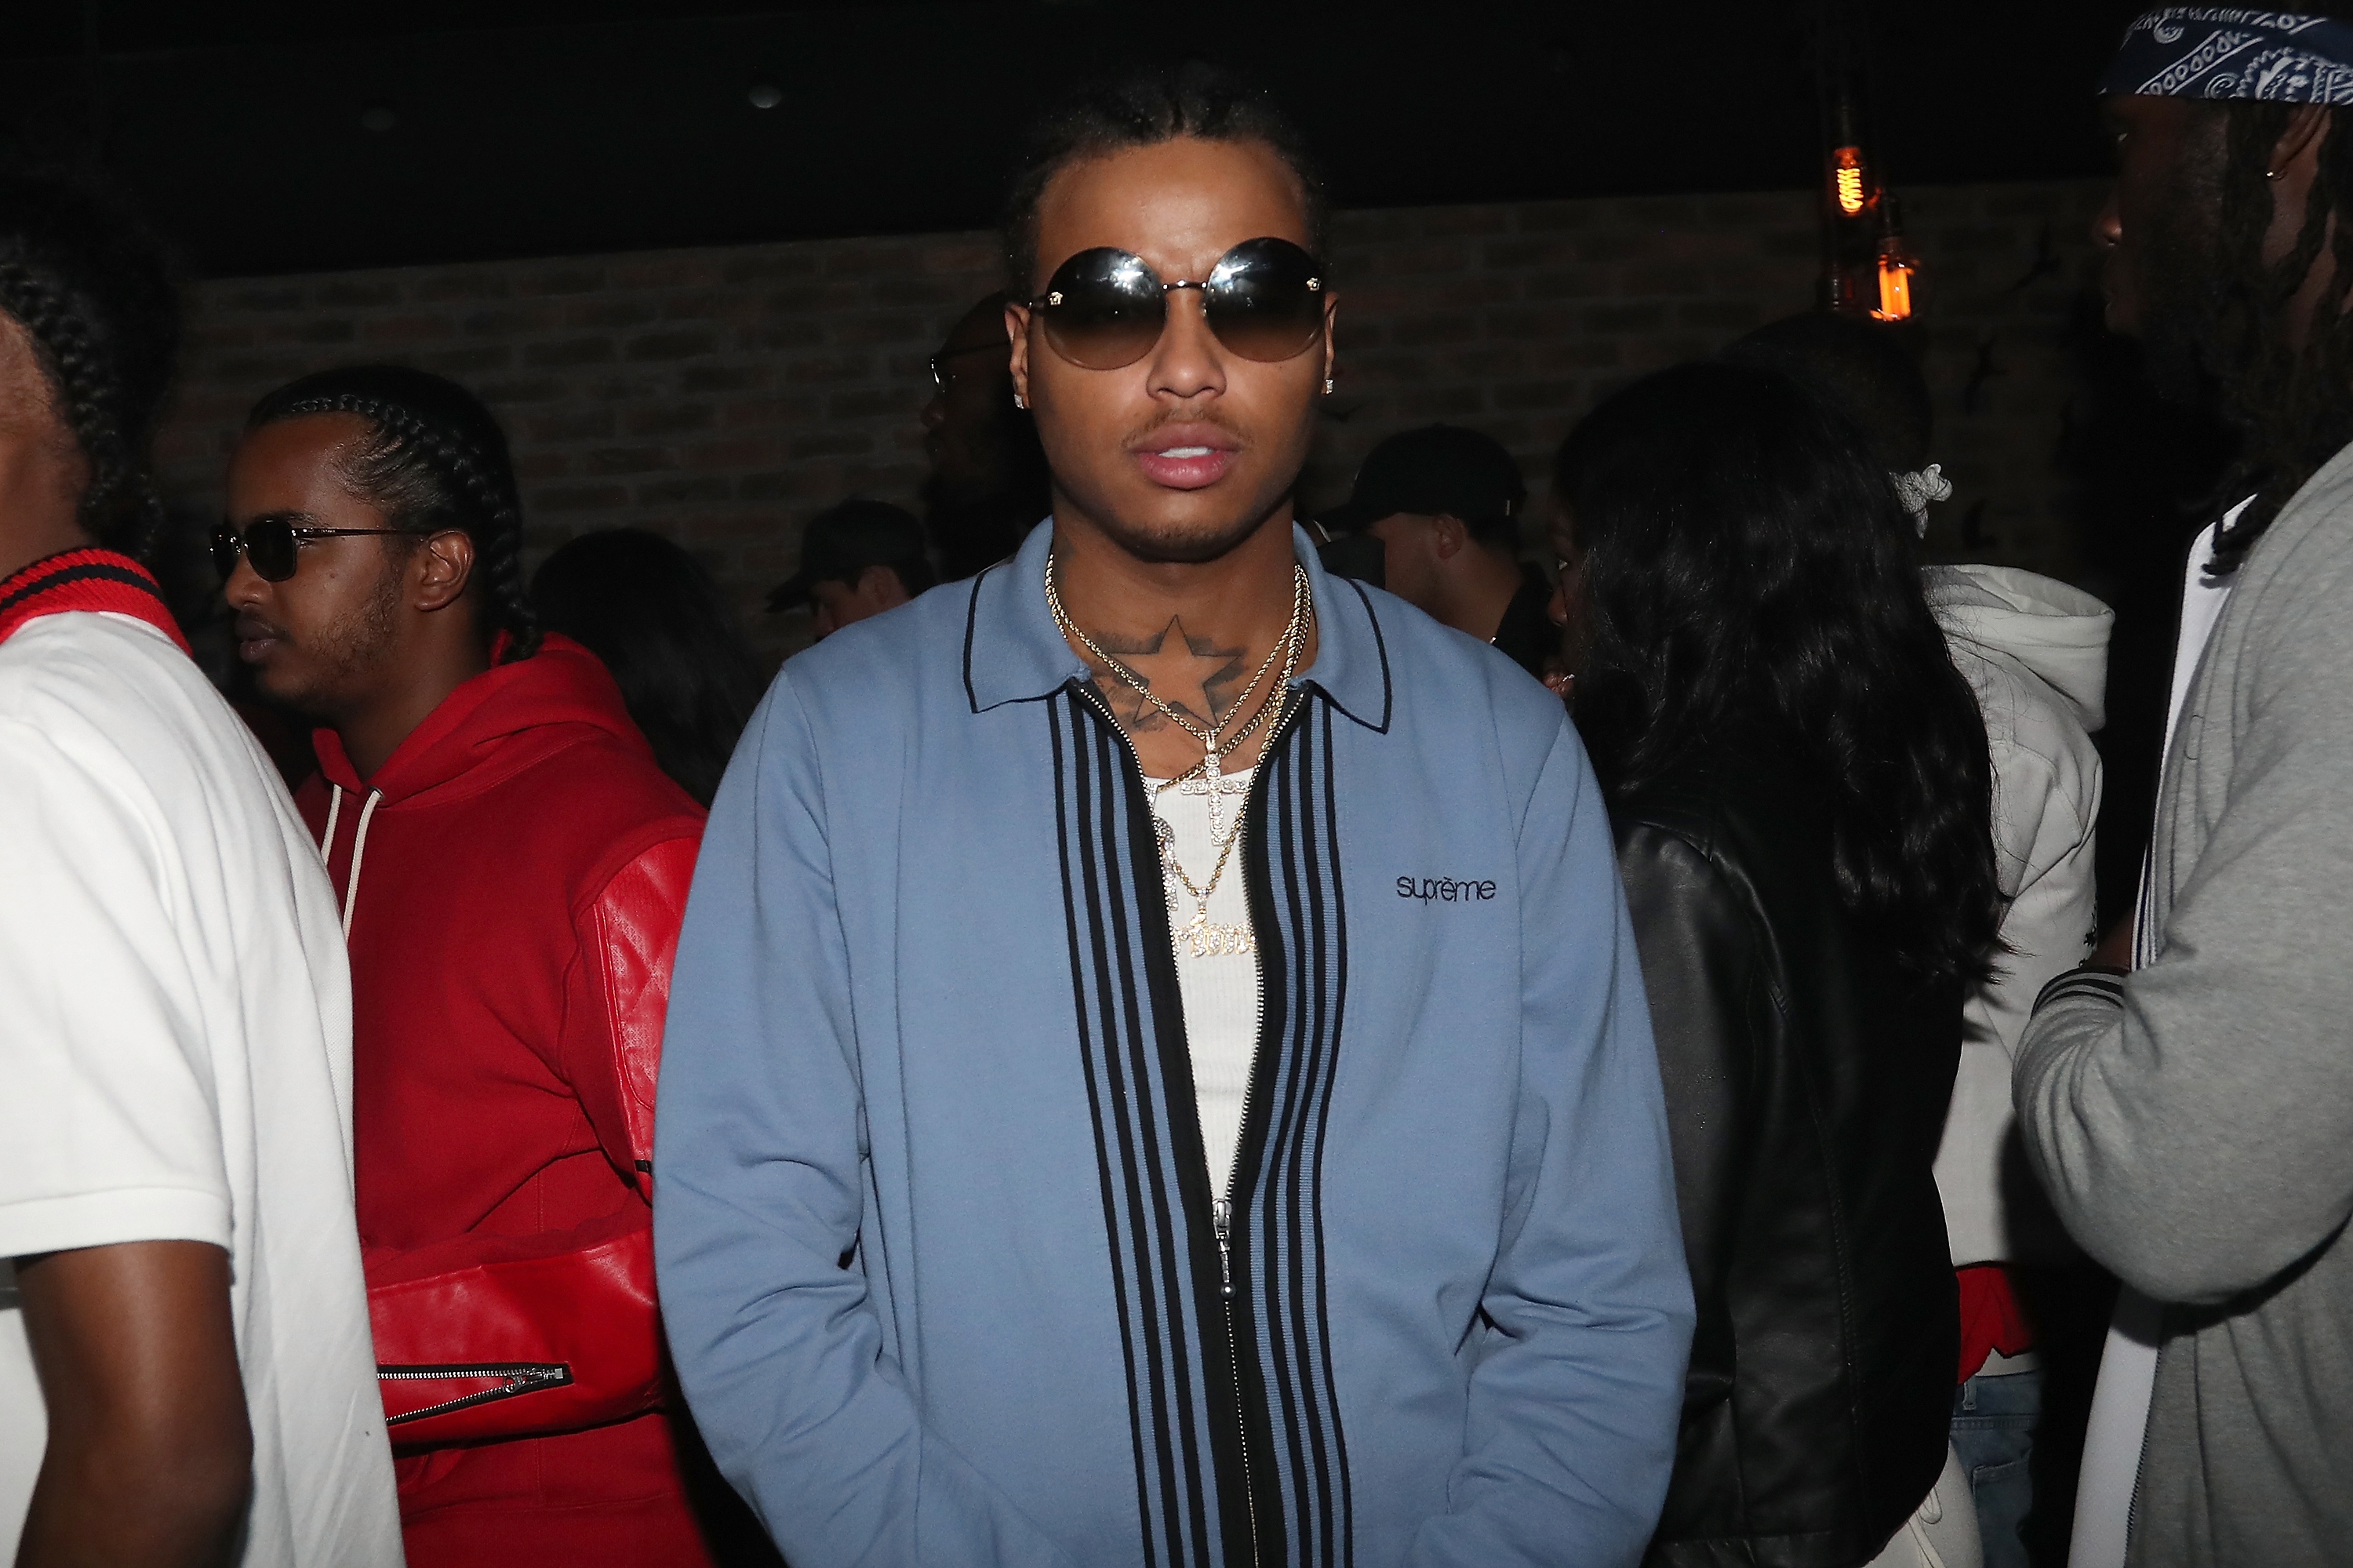 Smoke Dawg Shot and Killed in Toronto Club Incident: Report